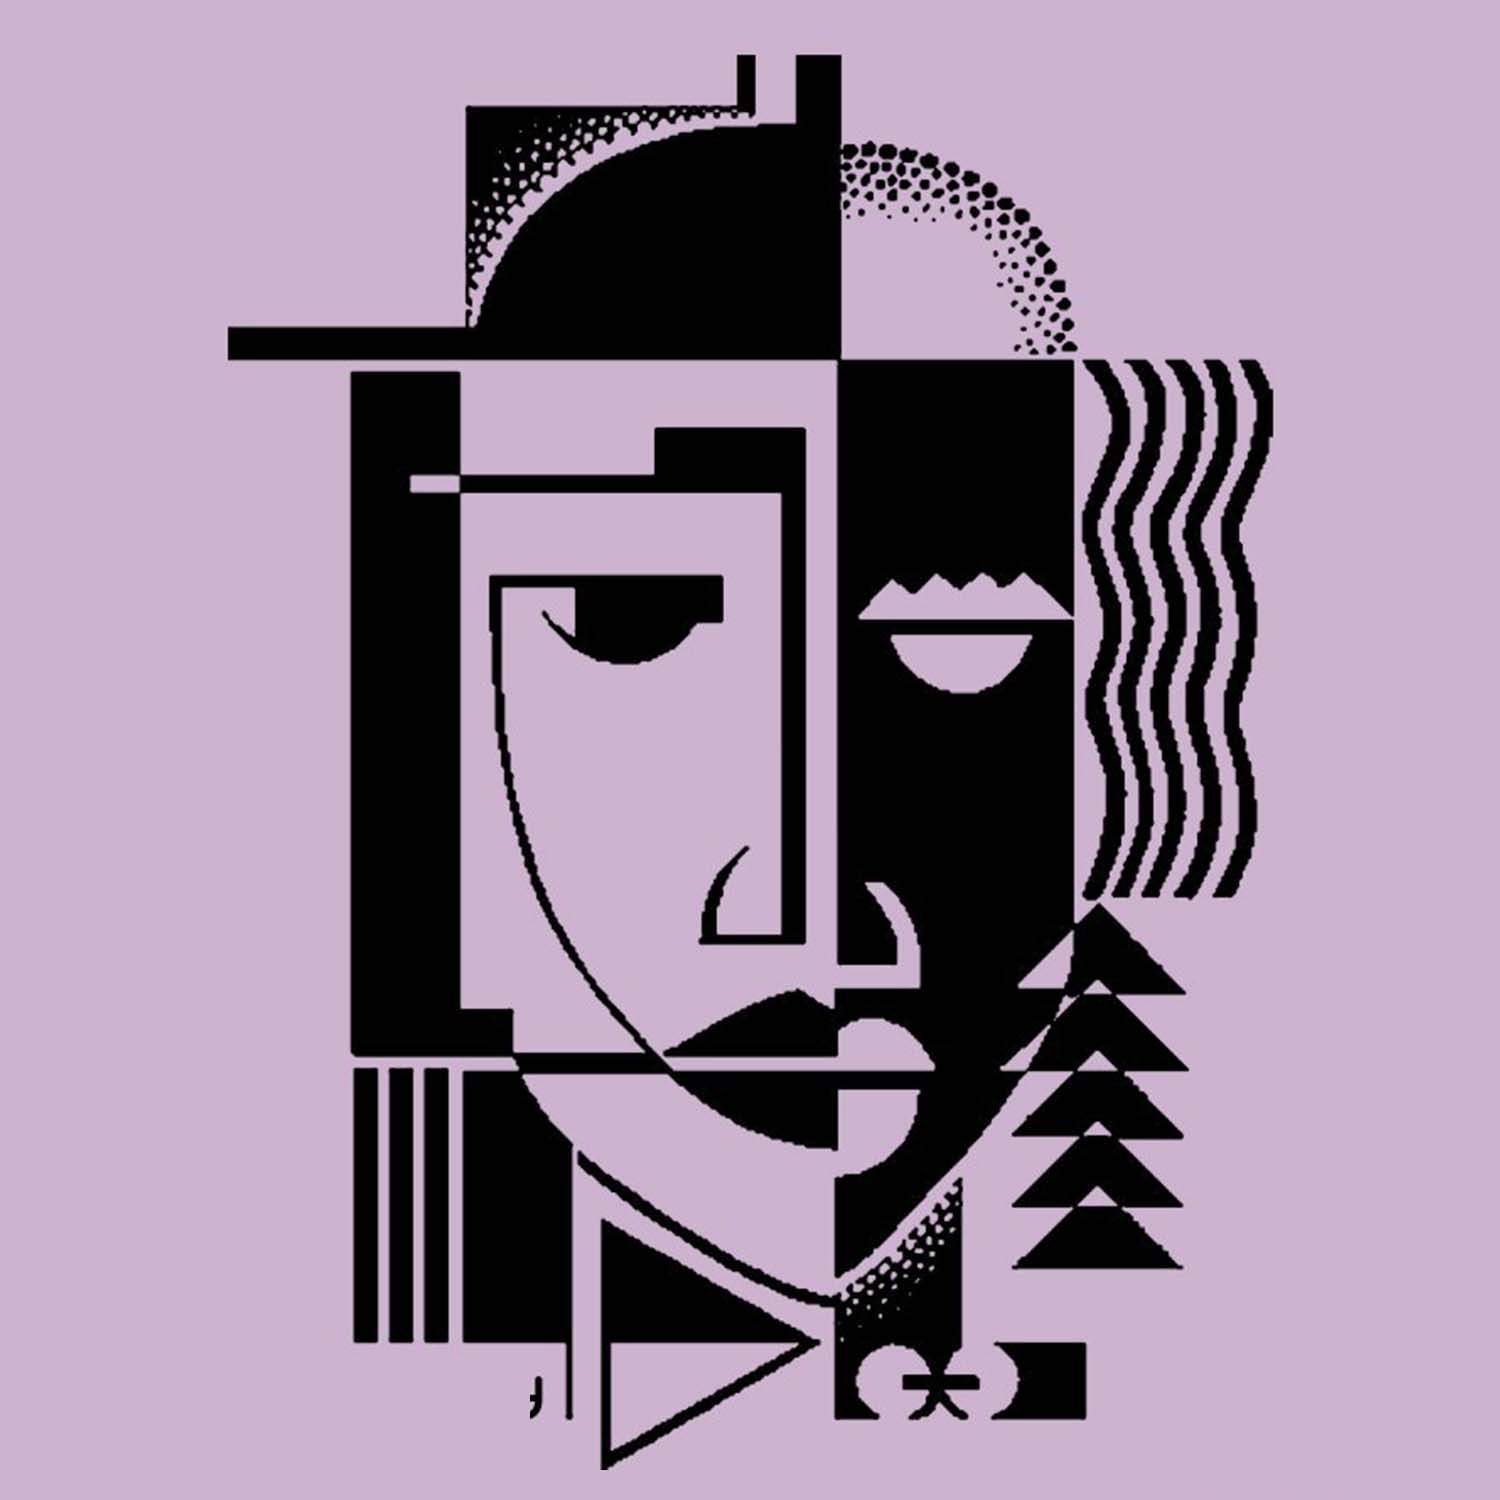 Image shows a Cubist-style face, promoting Shakespeare for kids, youth drama in Bellingham and Whatcom County.